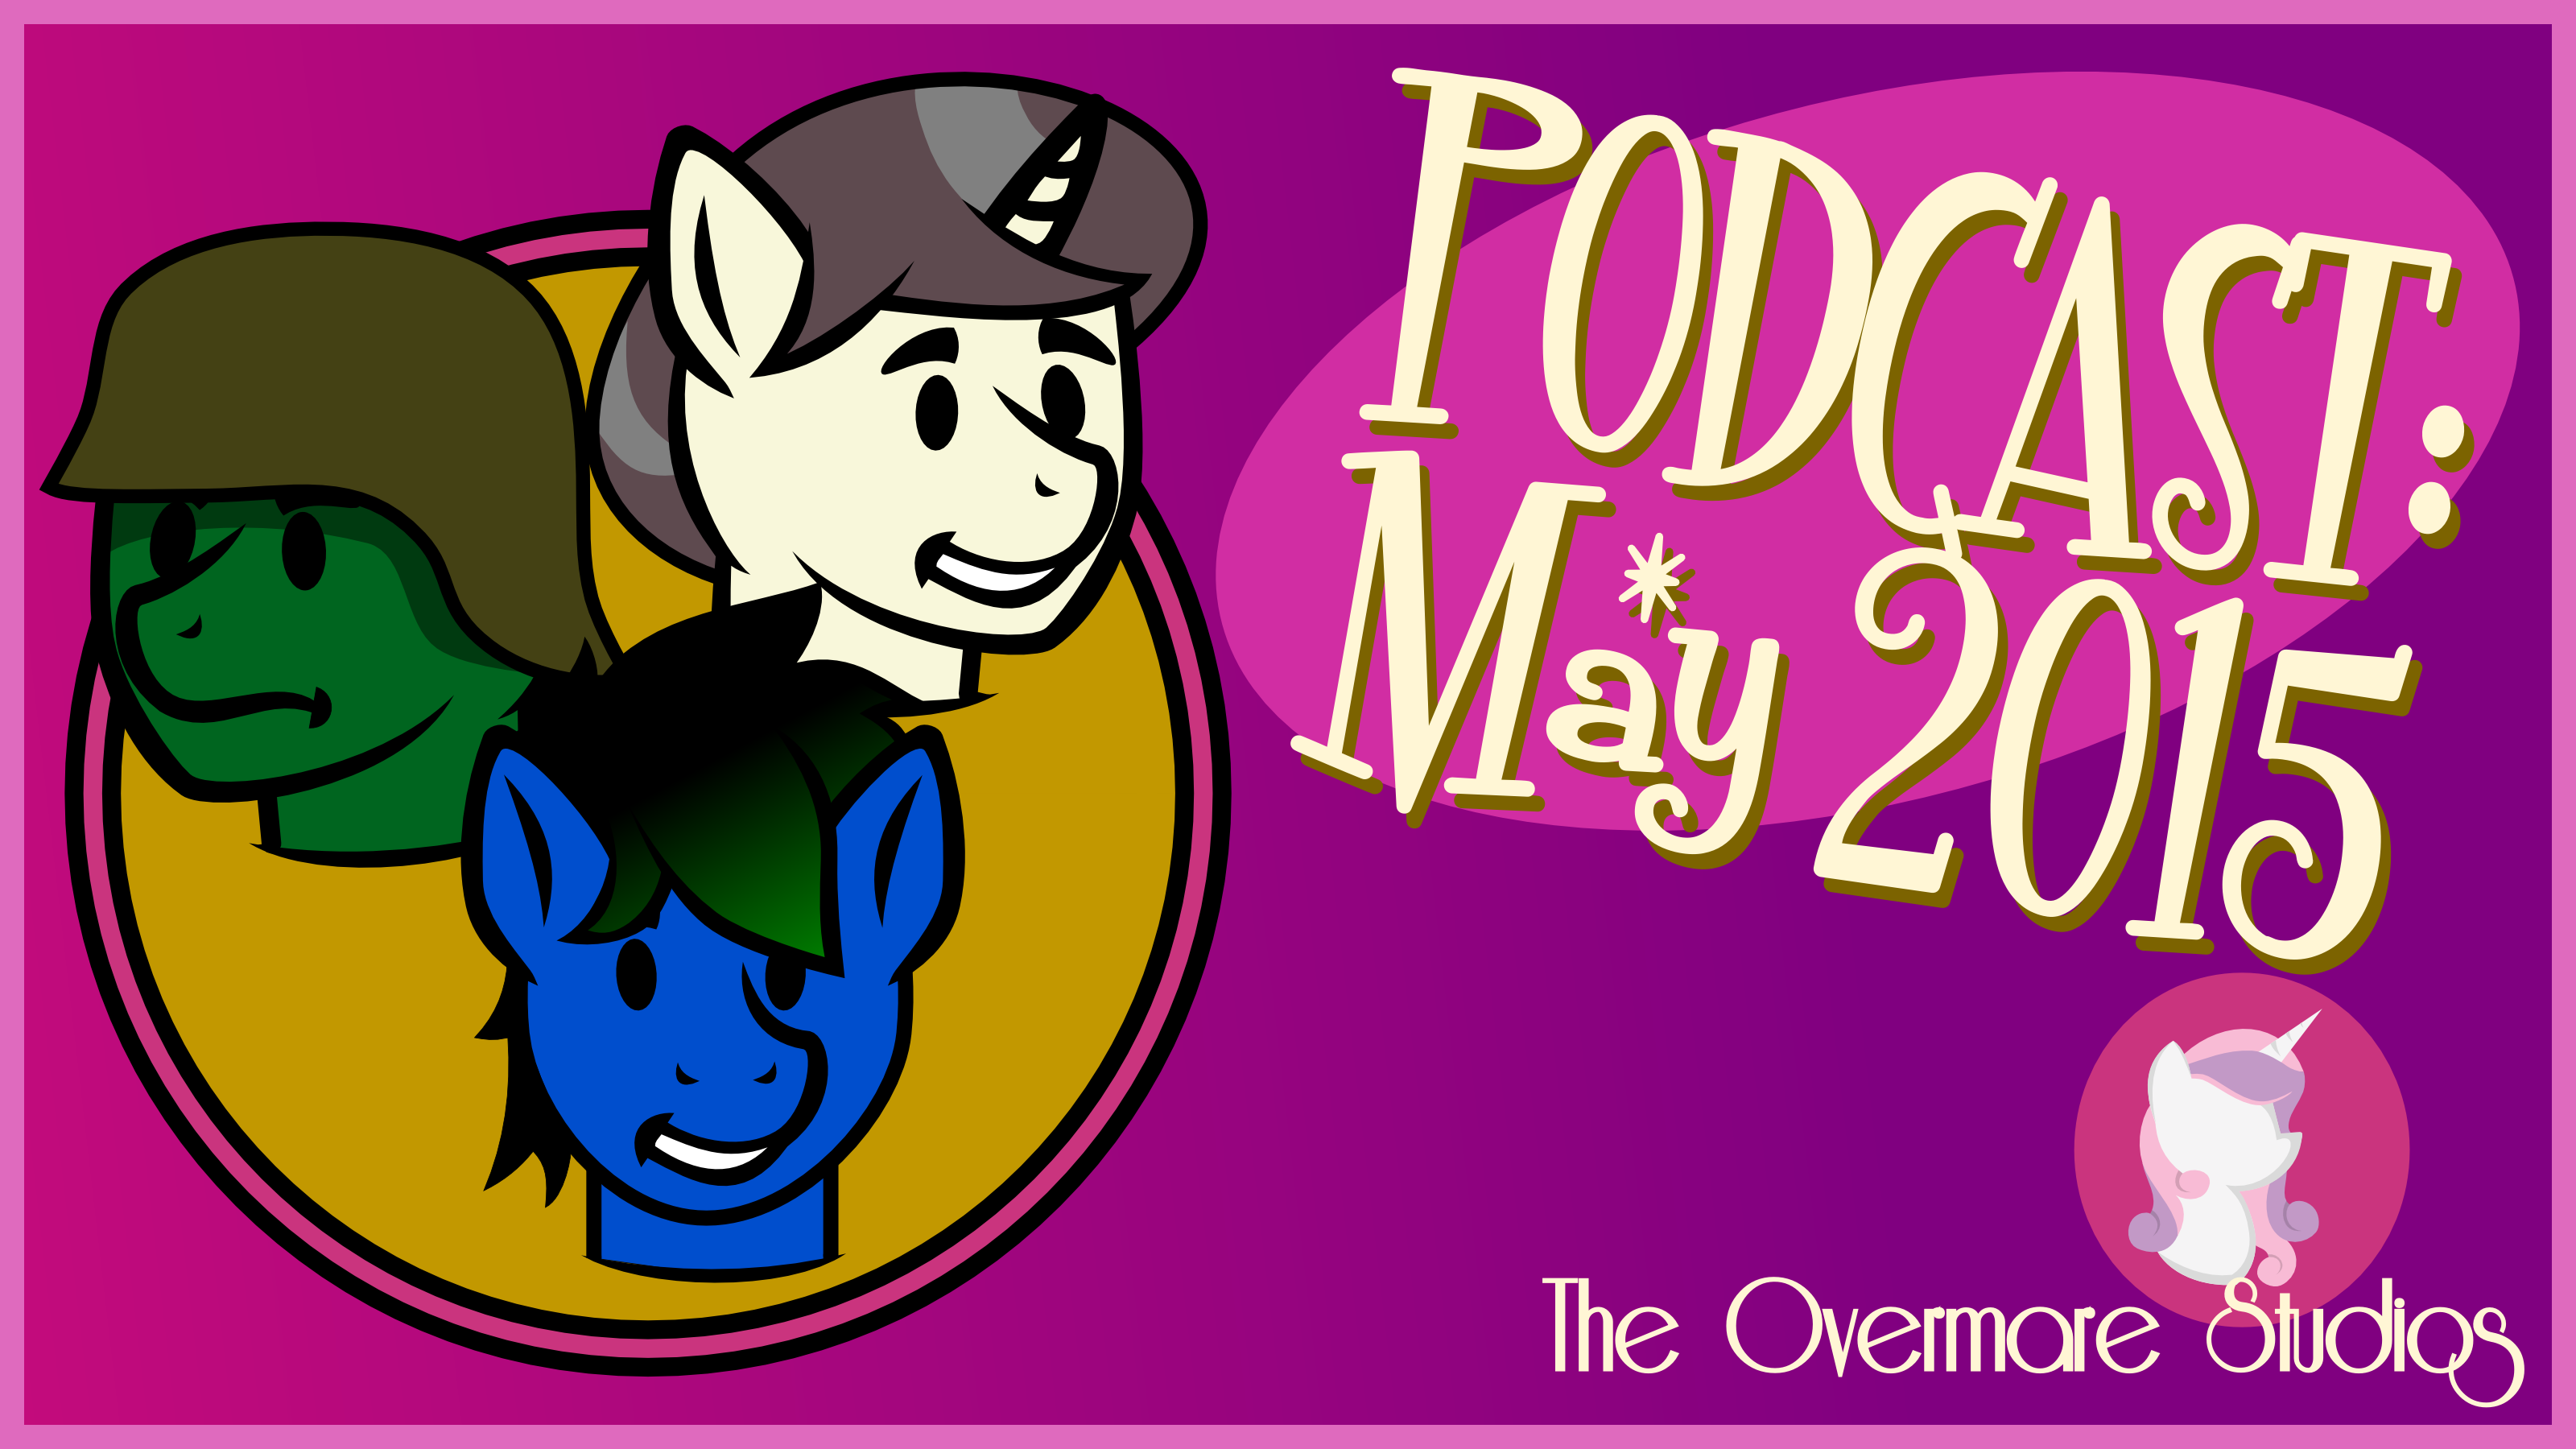 Podcast May 2015